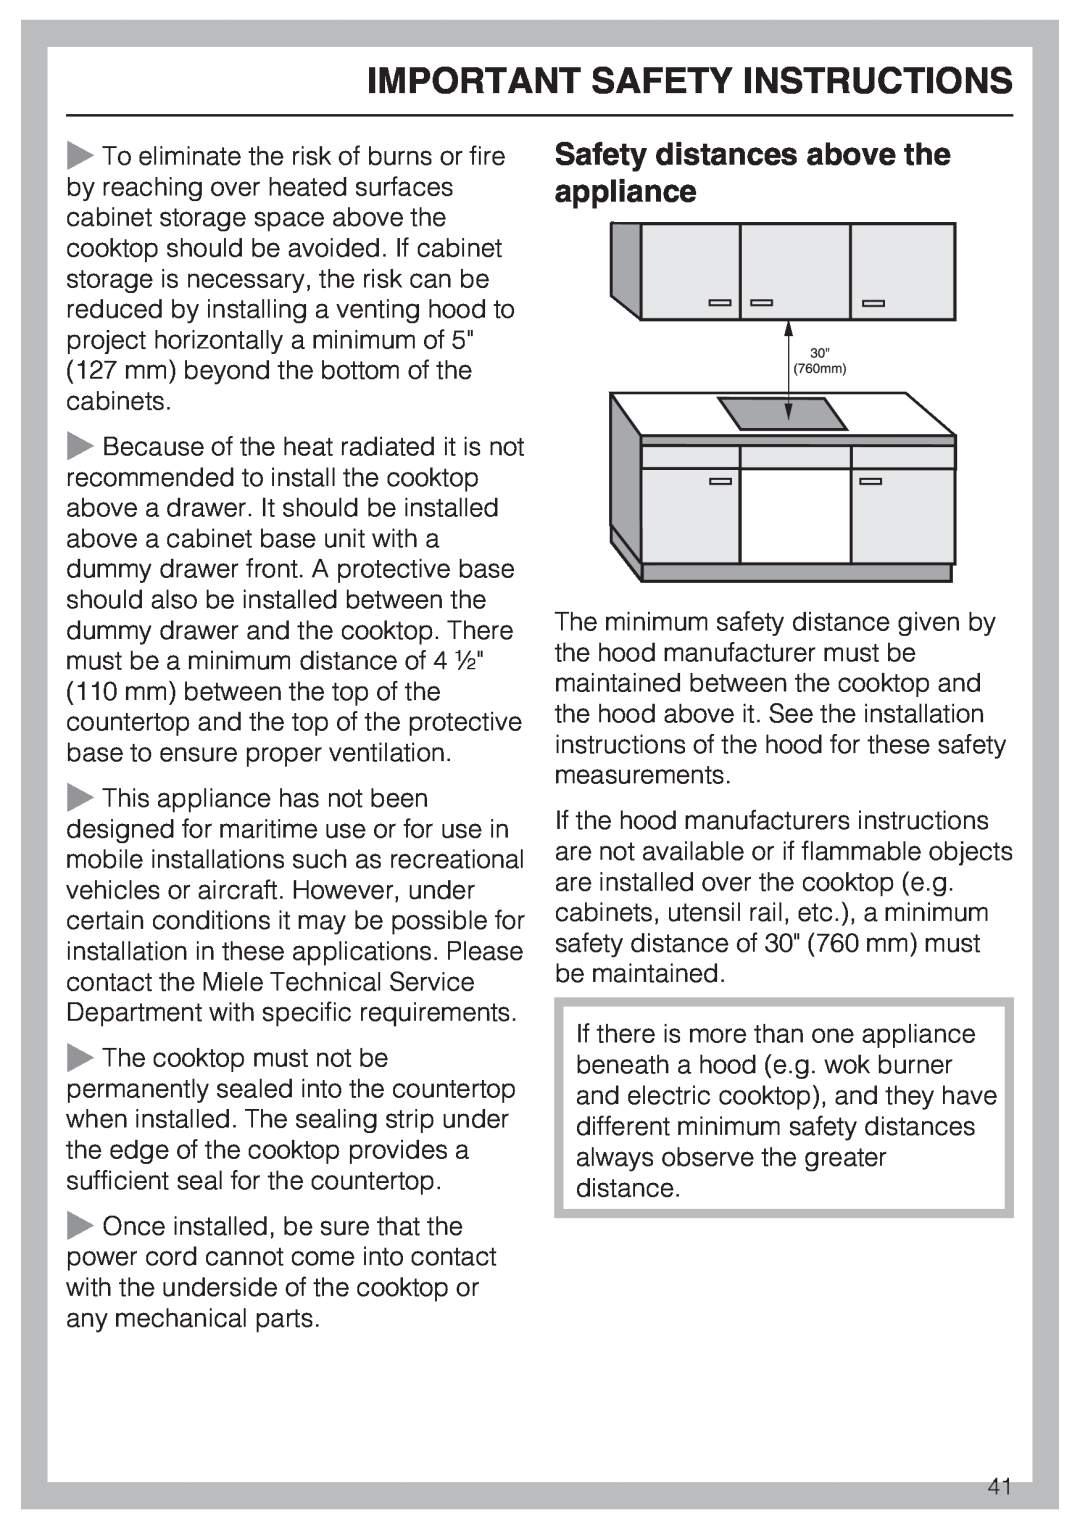 Miele KM 5753 installation instructions Safety distances above the appliance, Important Safety Instructions 